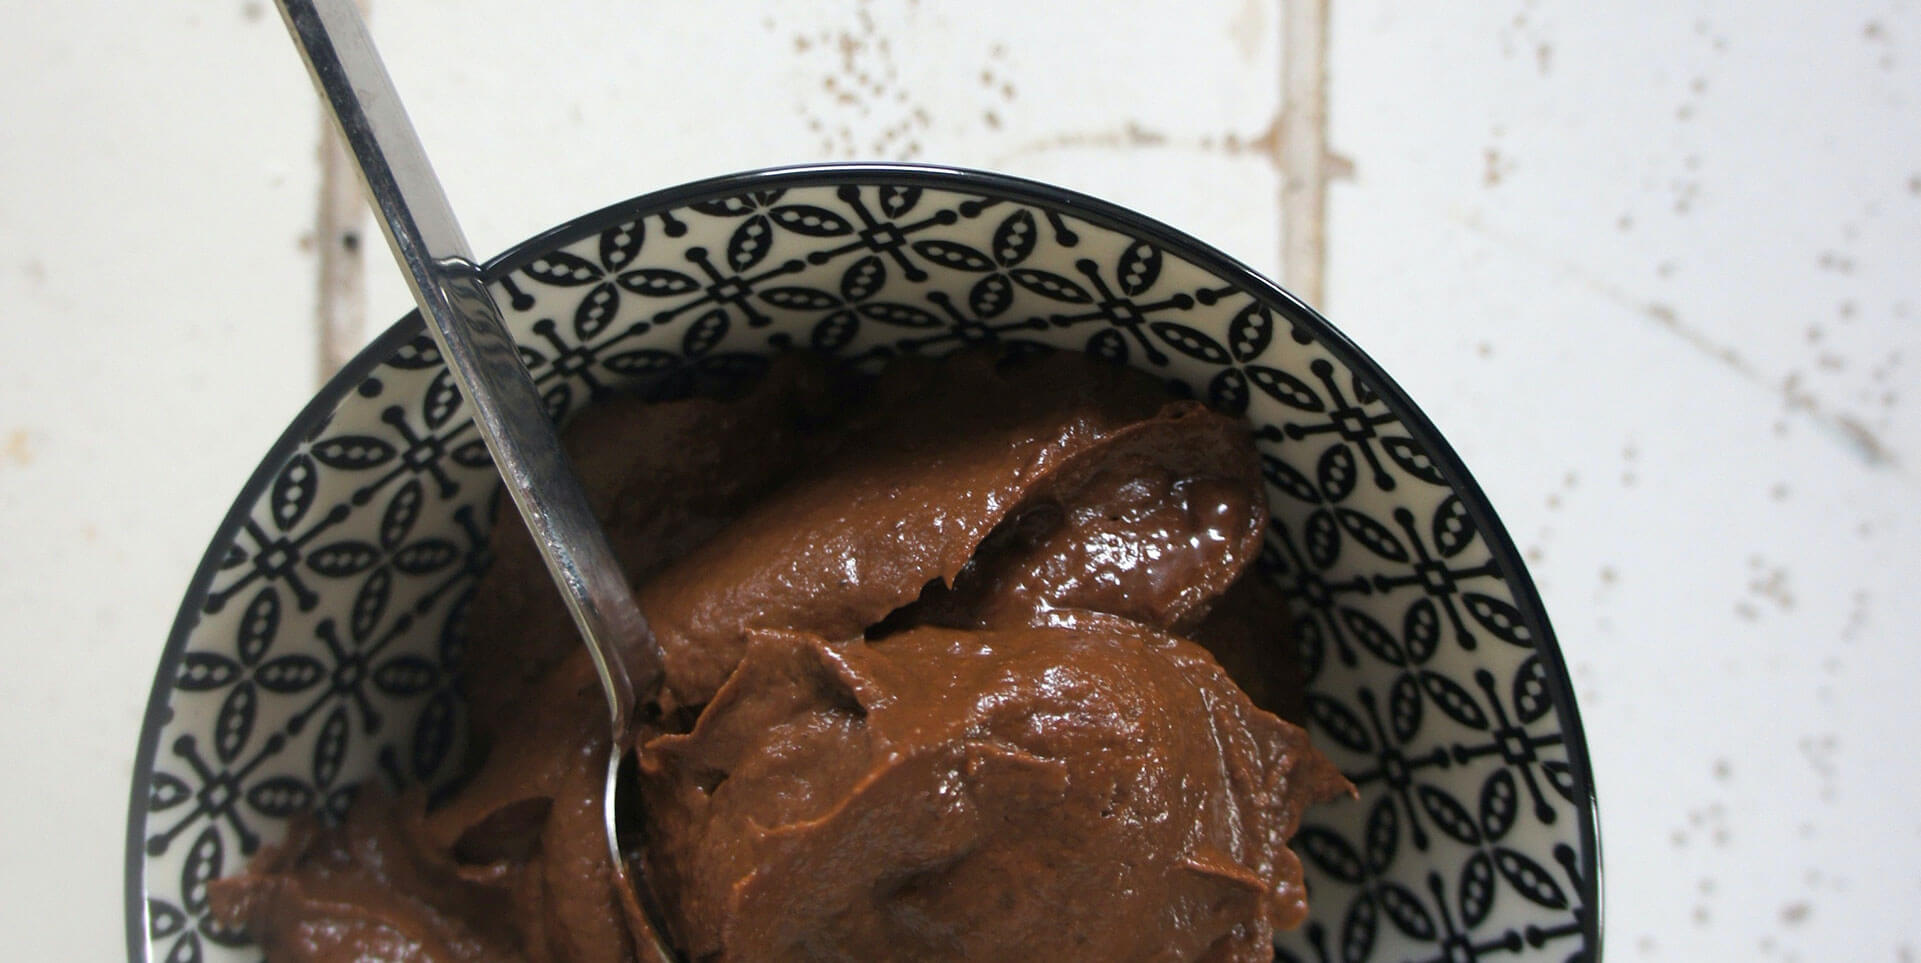 Bowl of chocolate mousse